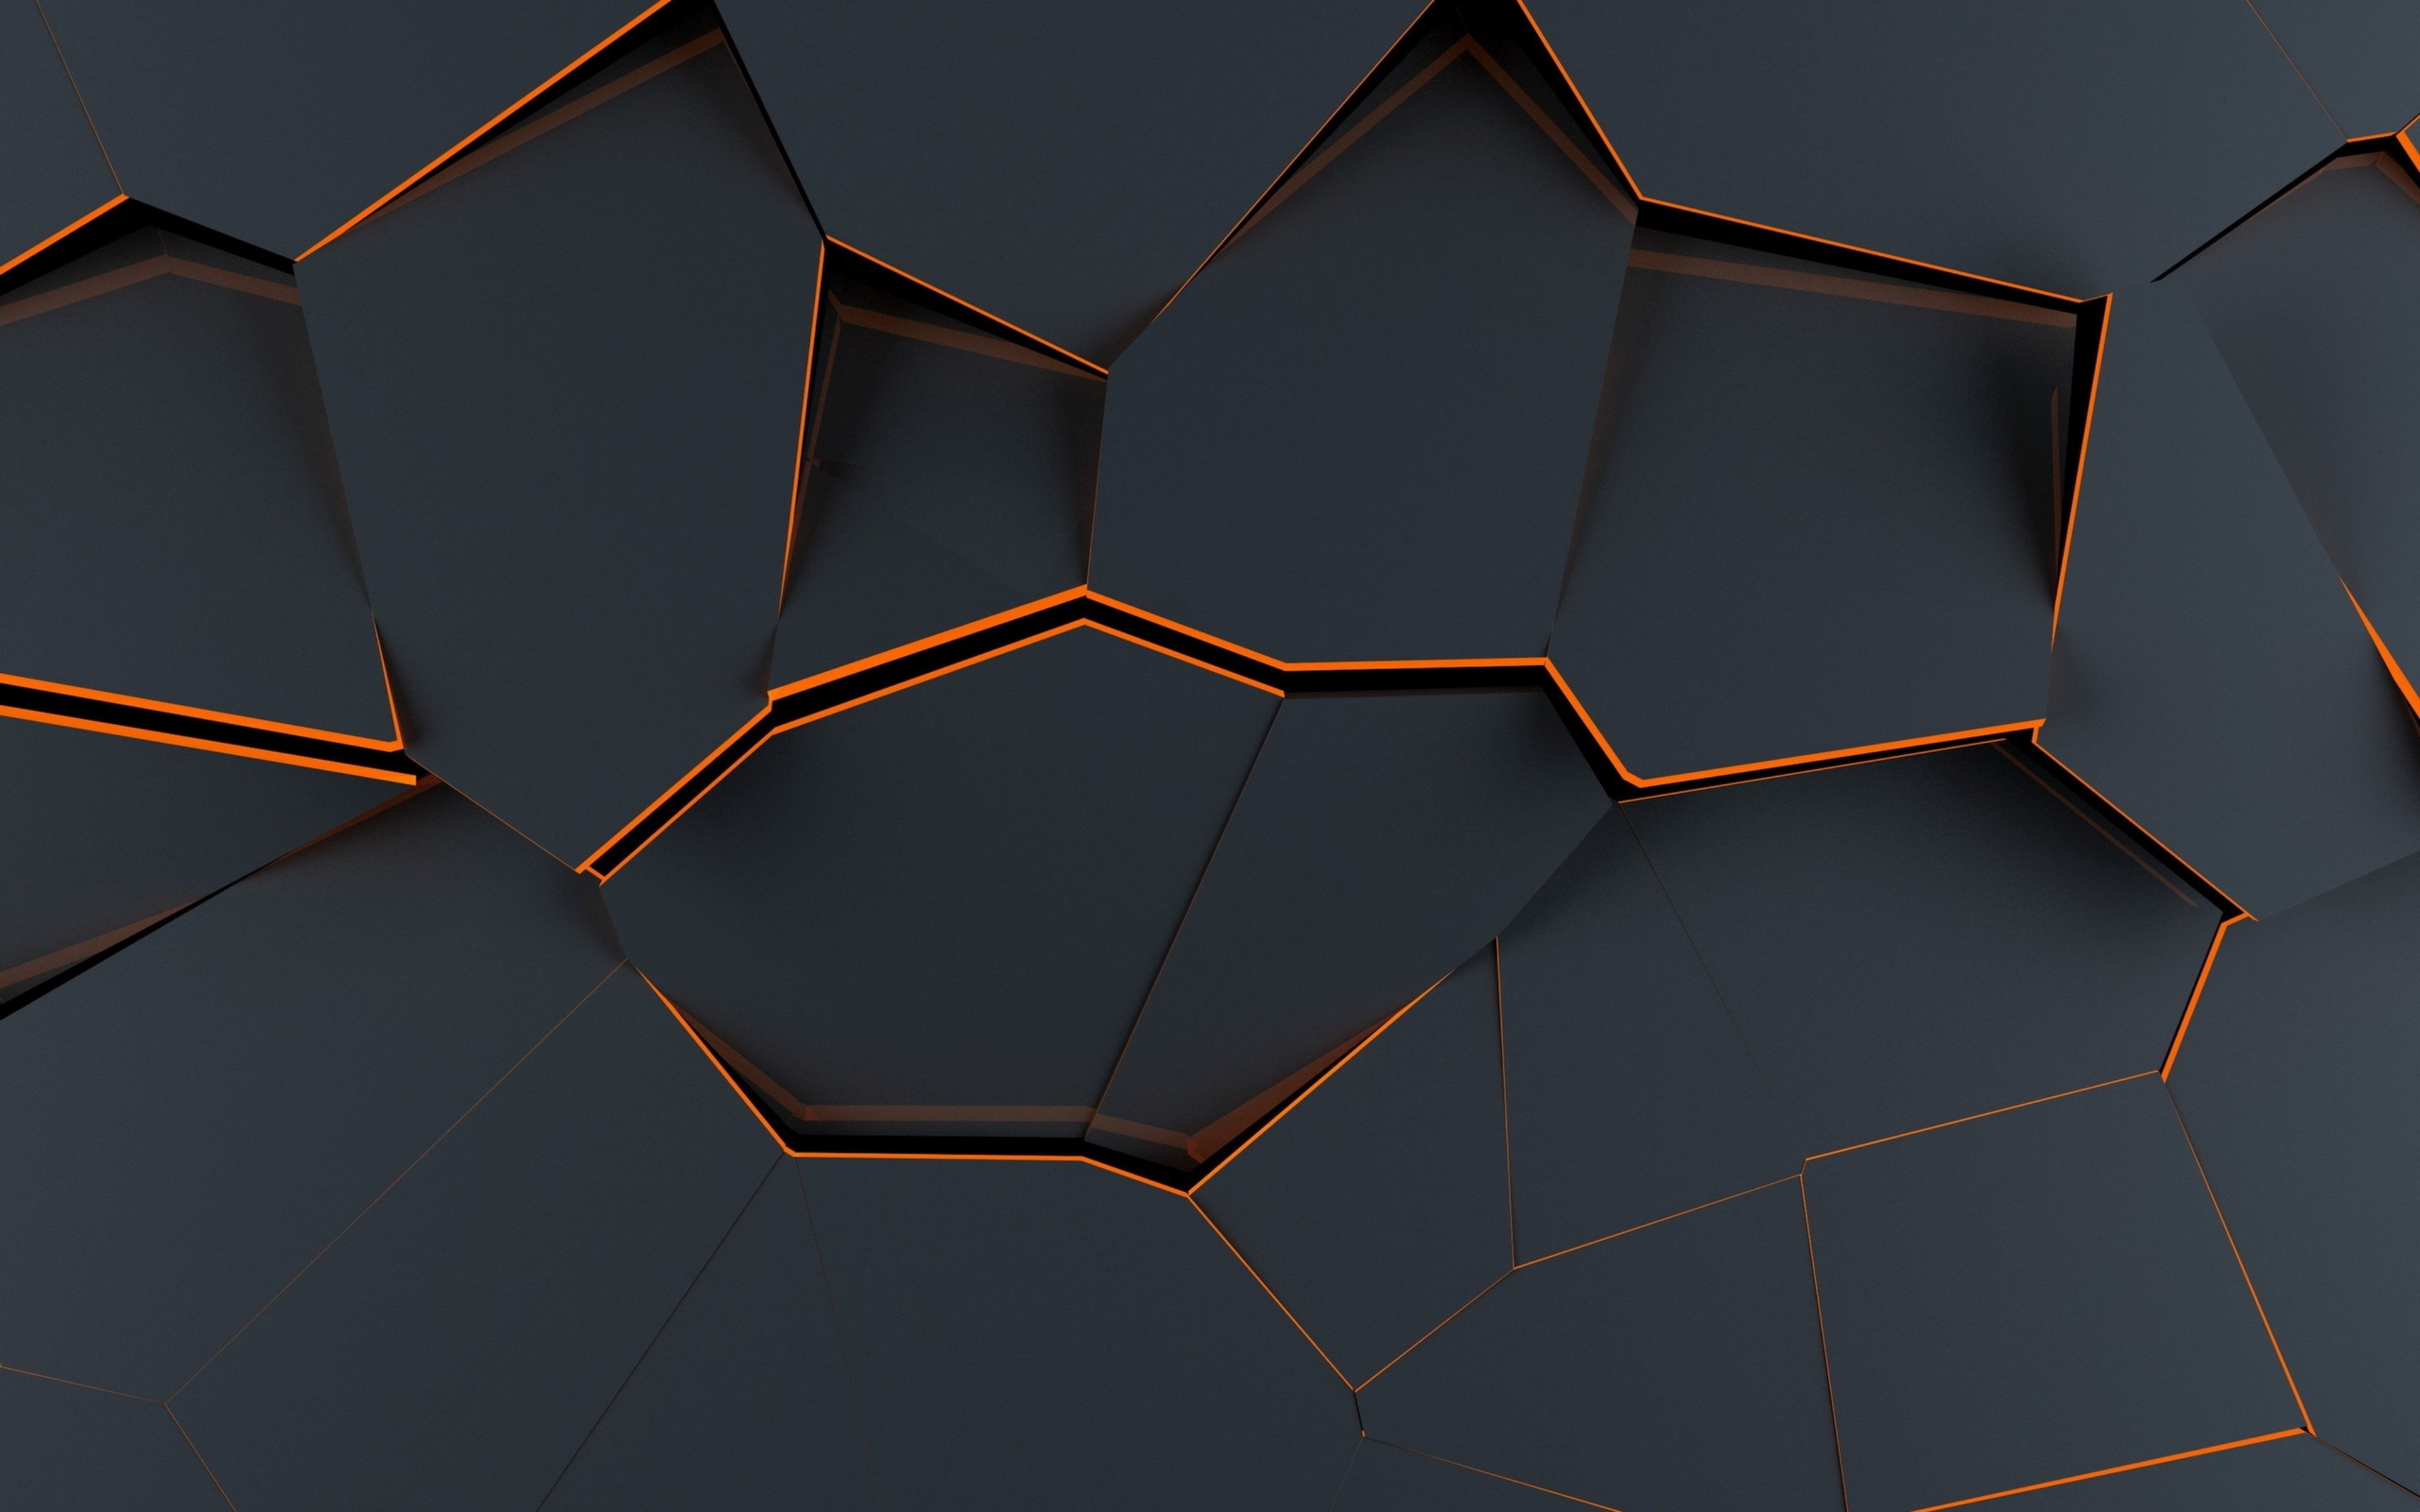 Dark Material Design Hd Abstract K Wallpapers Images Backgrounds | My ...